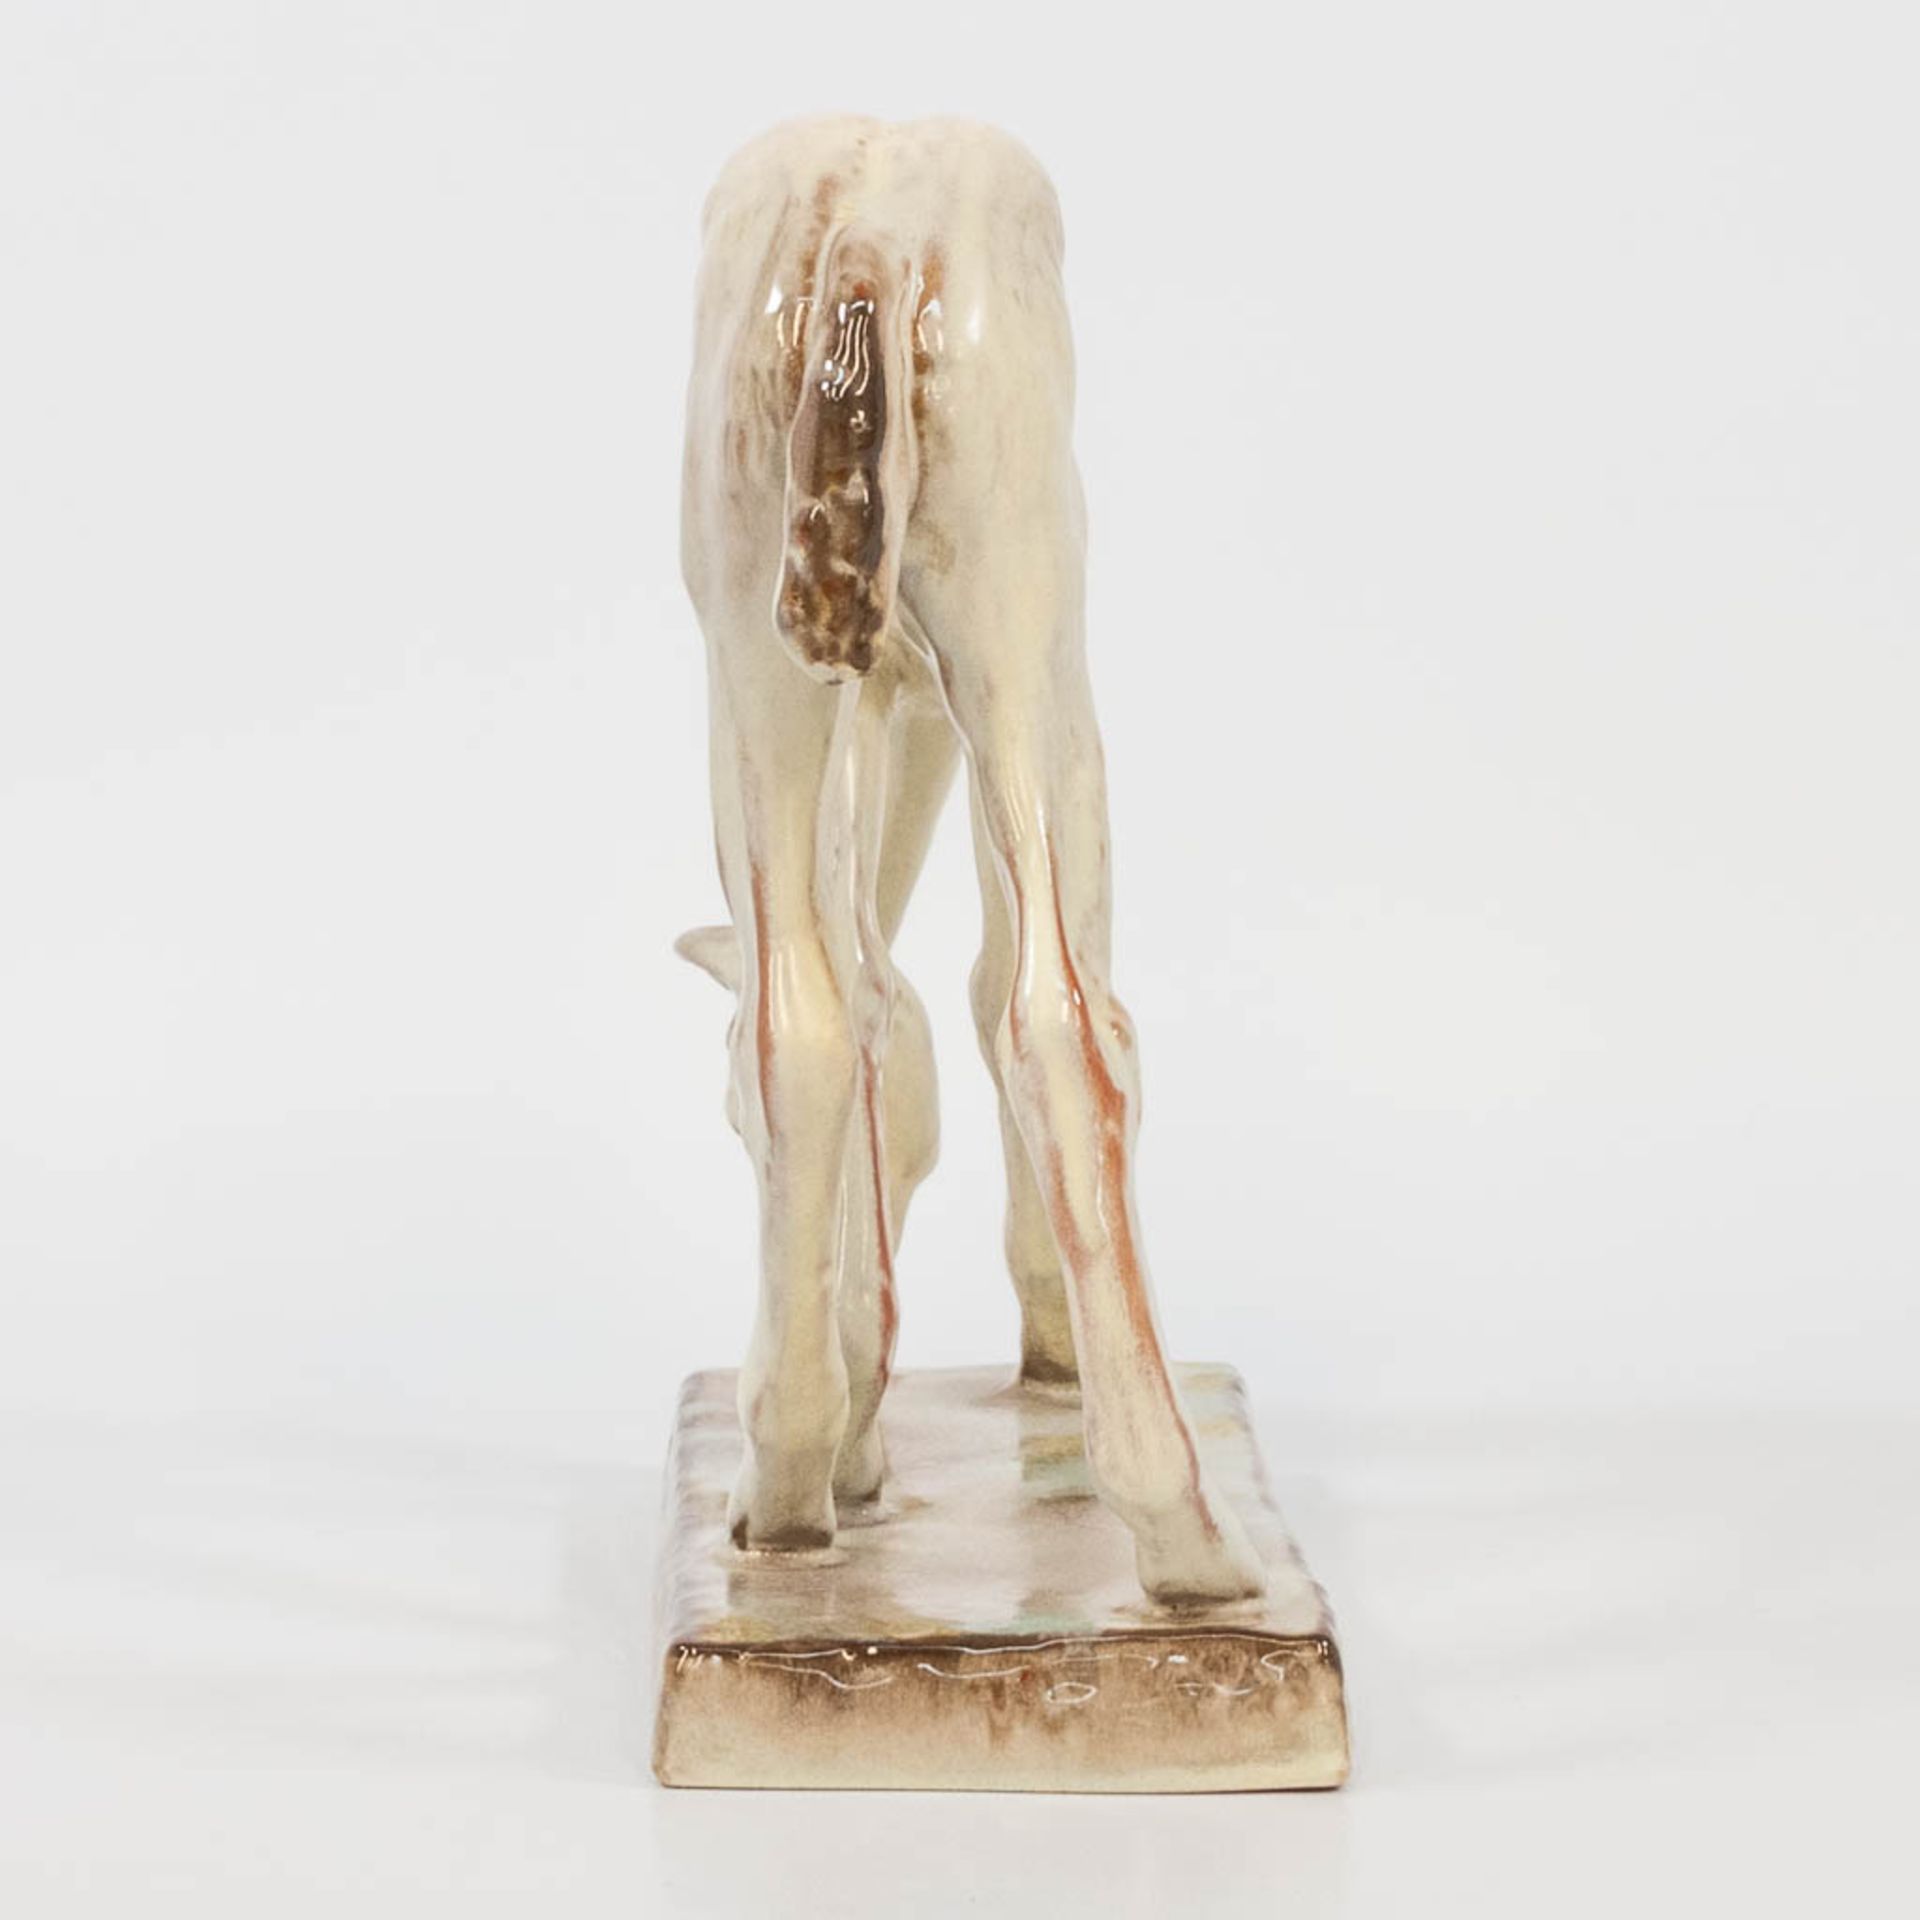 Else BACH (1899-1950) for Karlsruhe Majolica, a statue of a horse. (9 x 23 x 21,5 cm) - Image 3 of 16